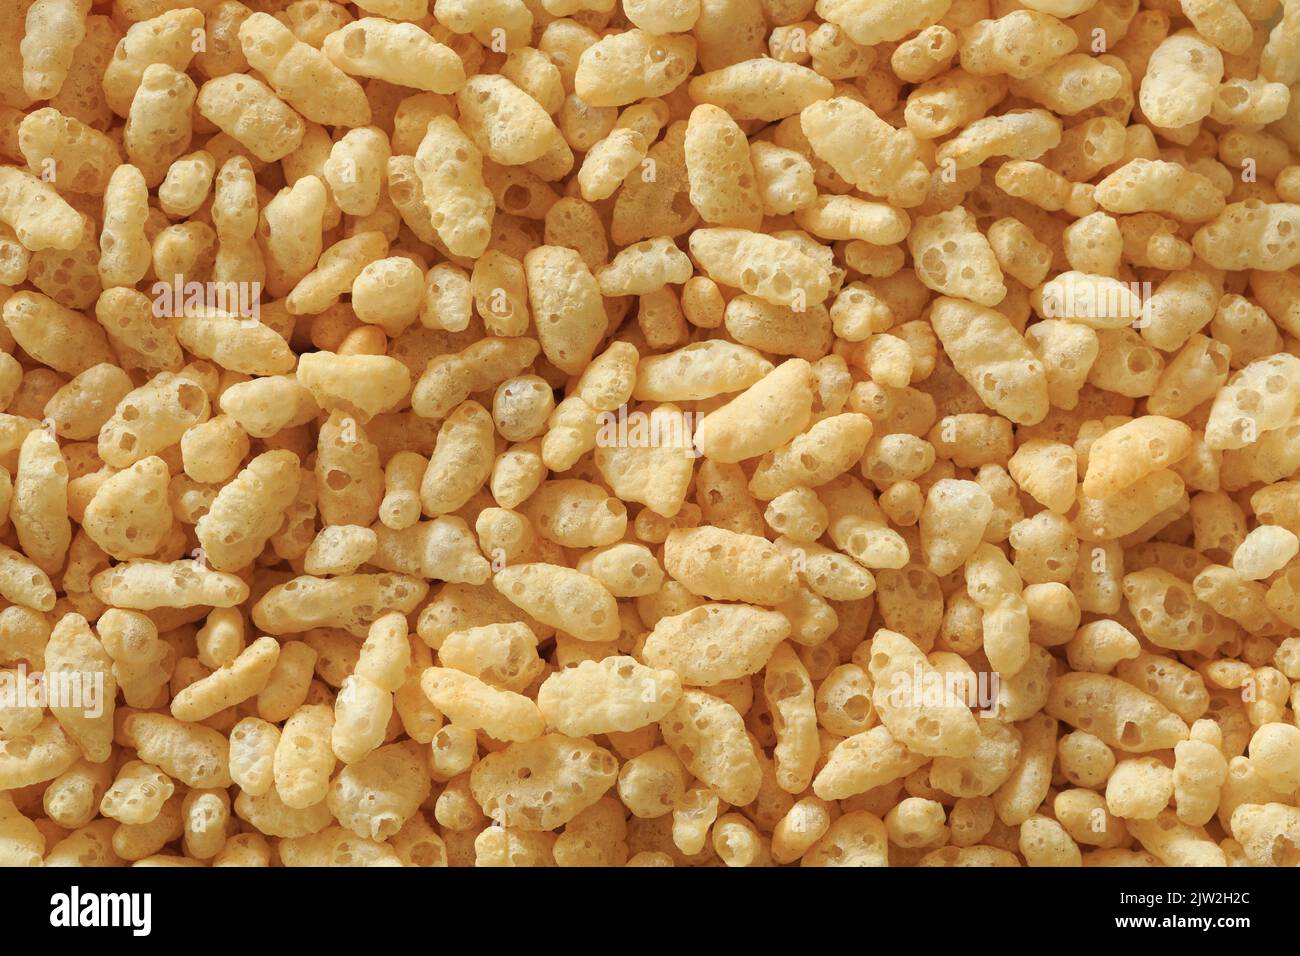 Grains of puffed rice cereal, filling the frame Stock Photo